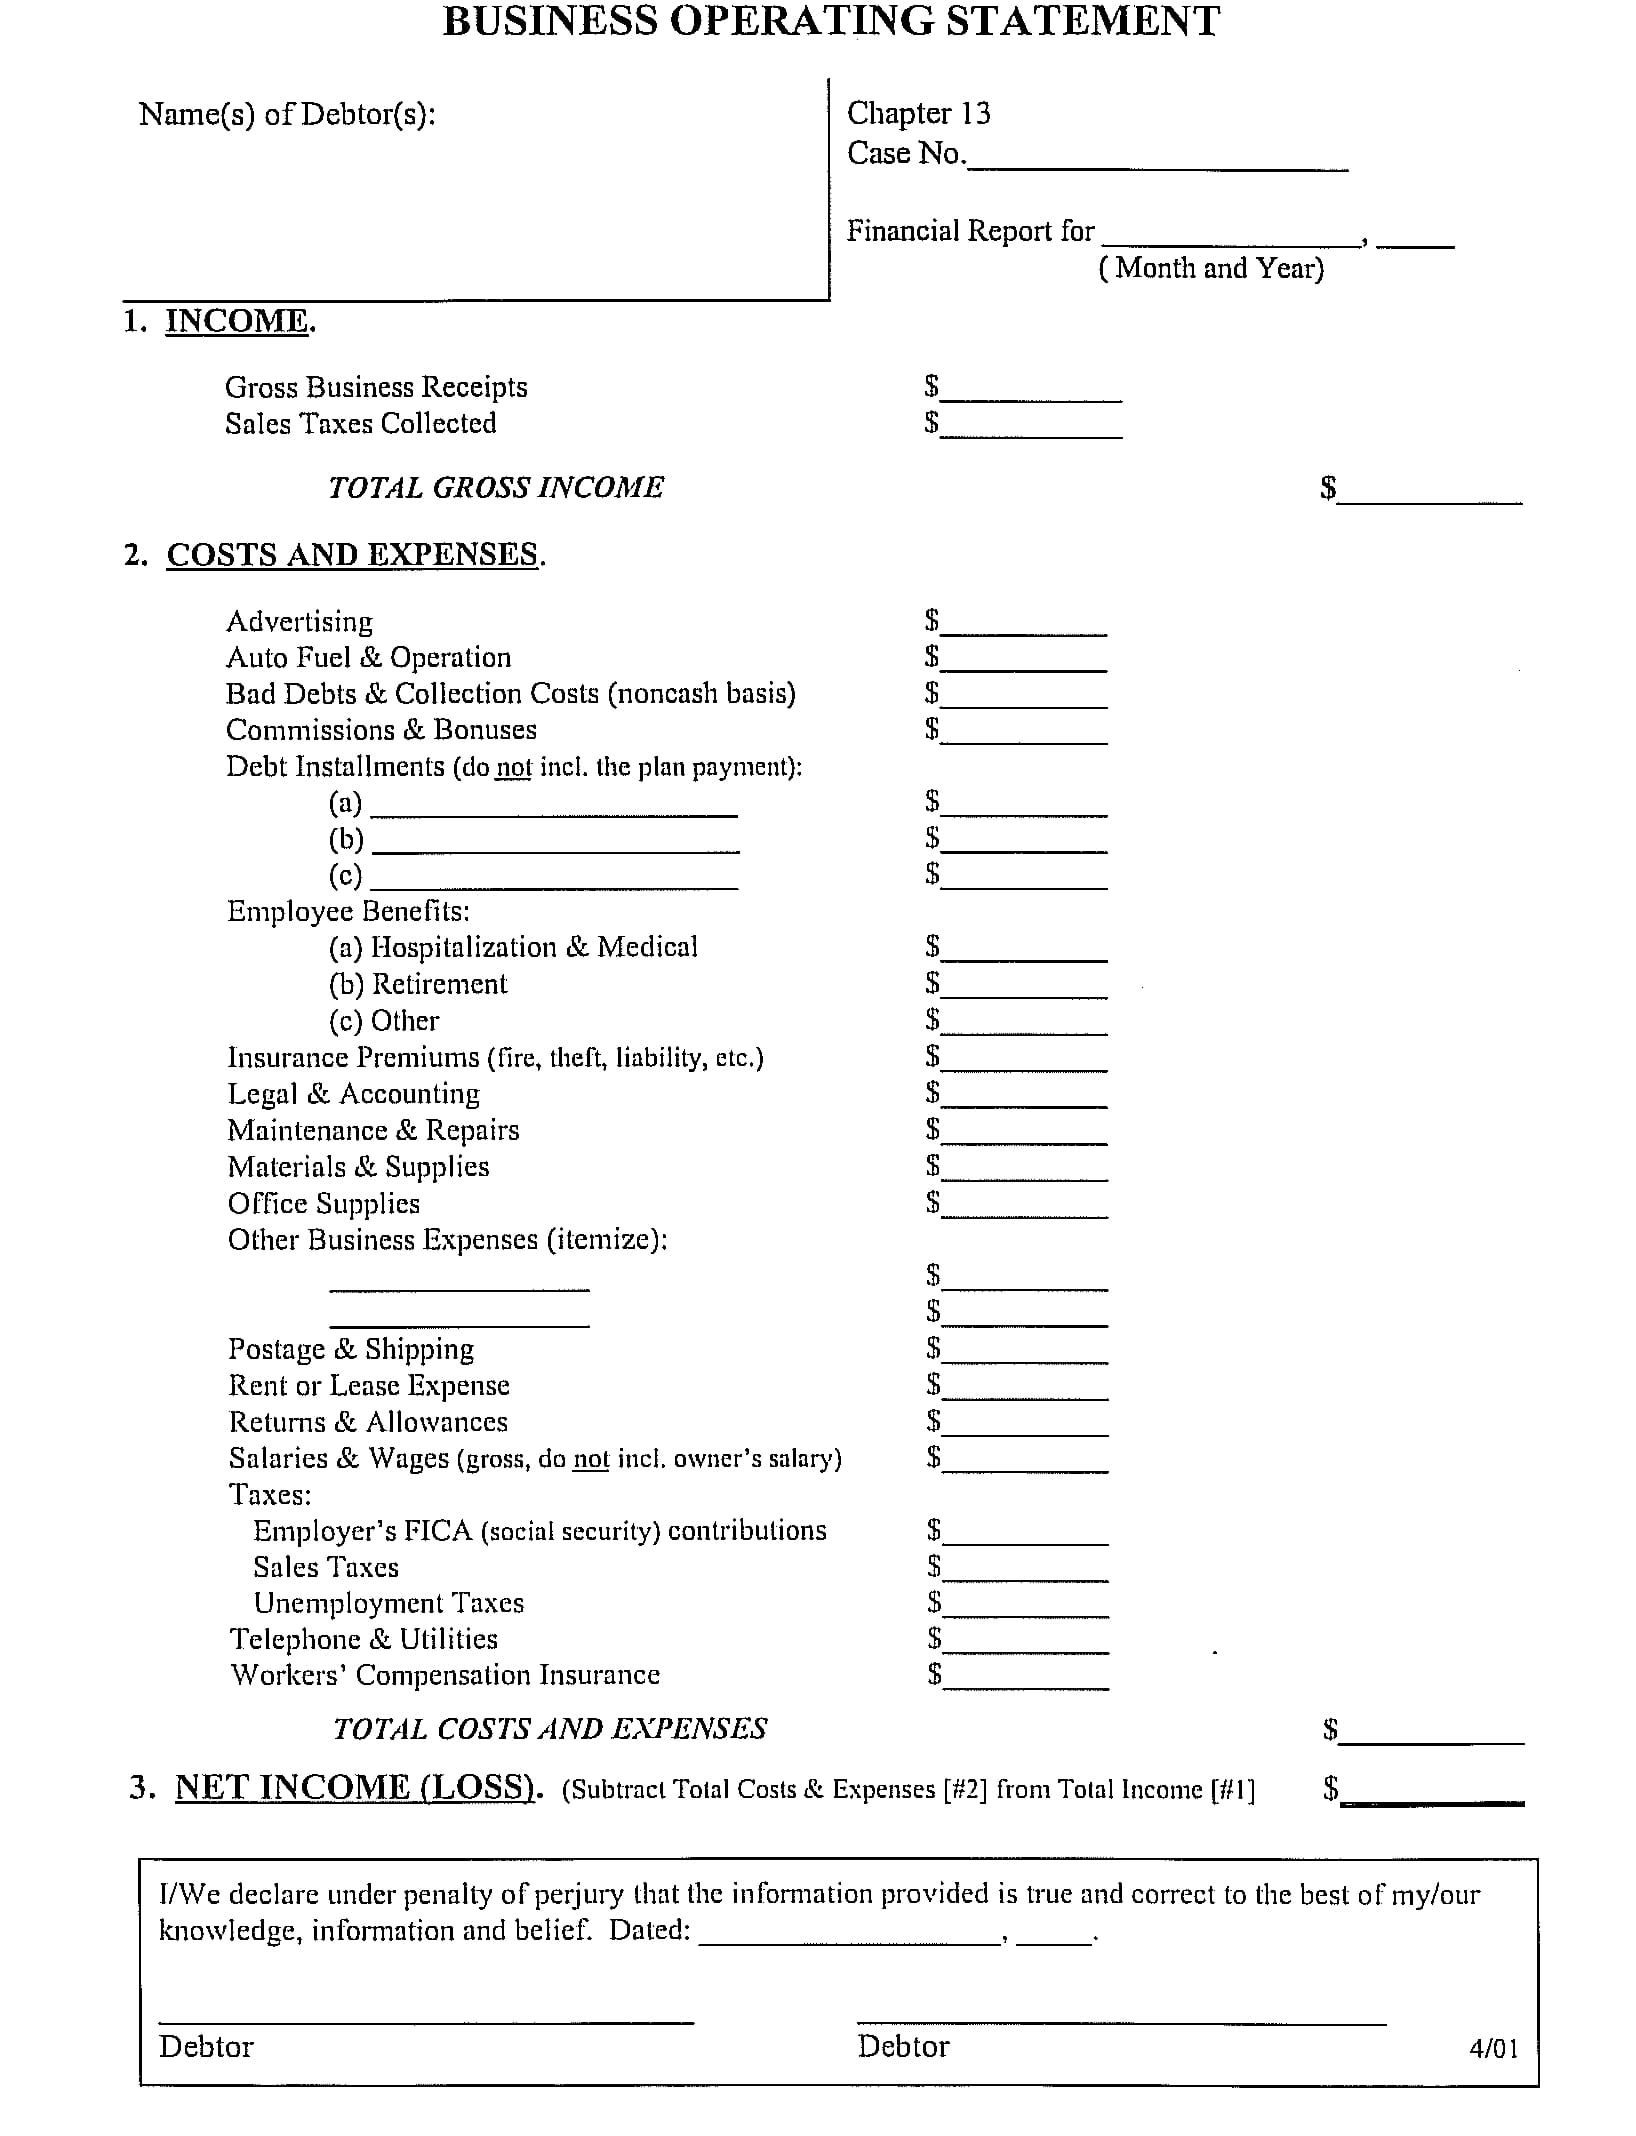 business operating statement form 1